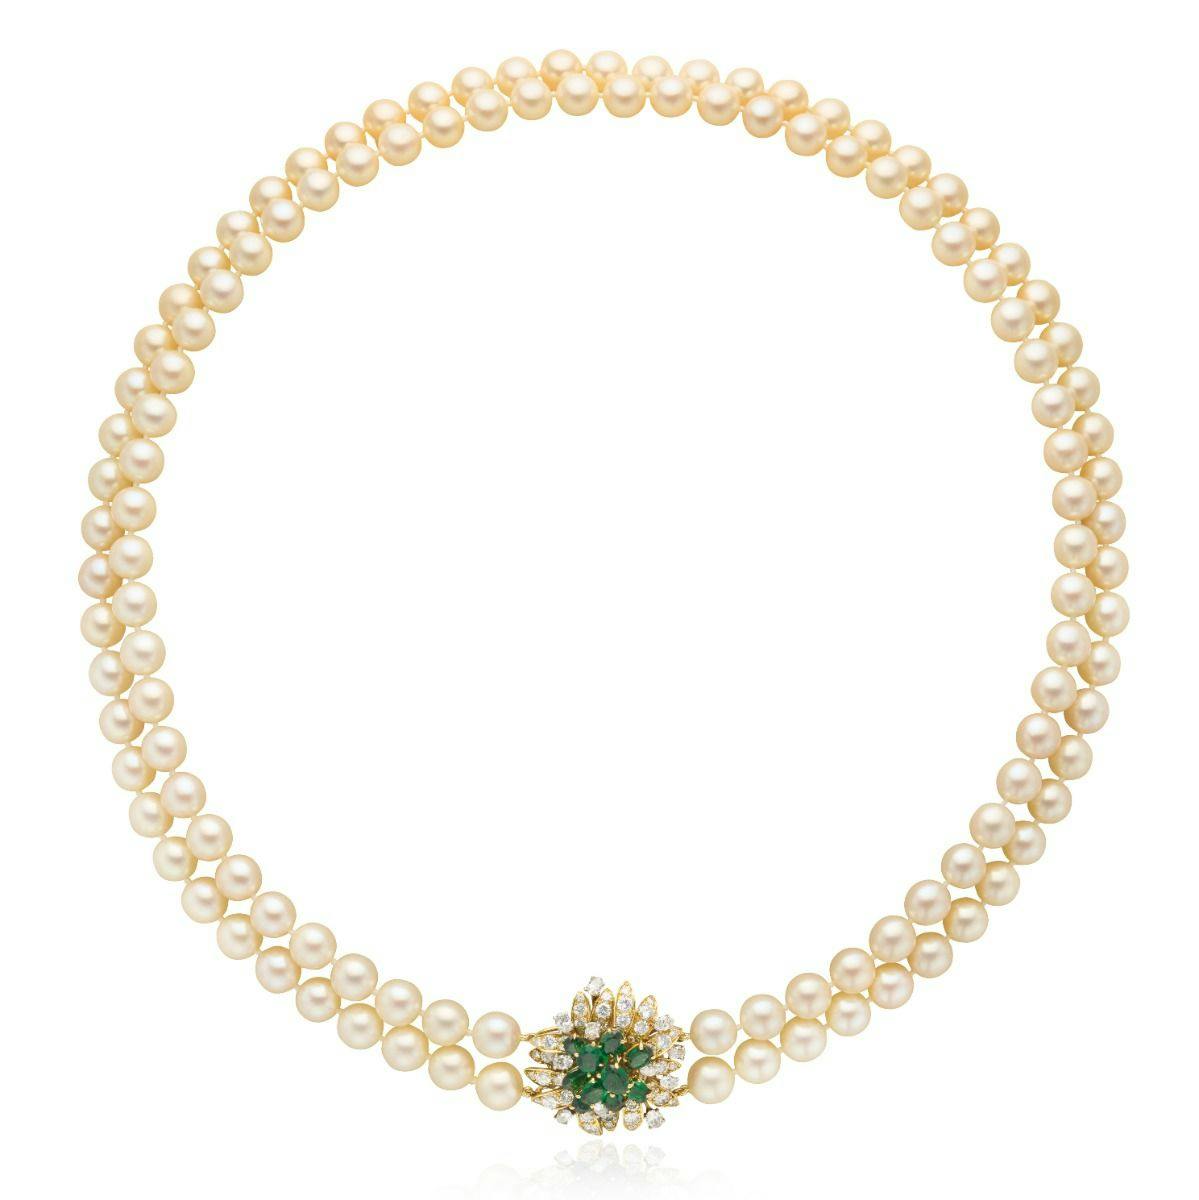 Julius Cohen 1970's 18k Yellow & White Gold Pearl and Gemstone Necklace